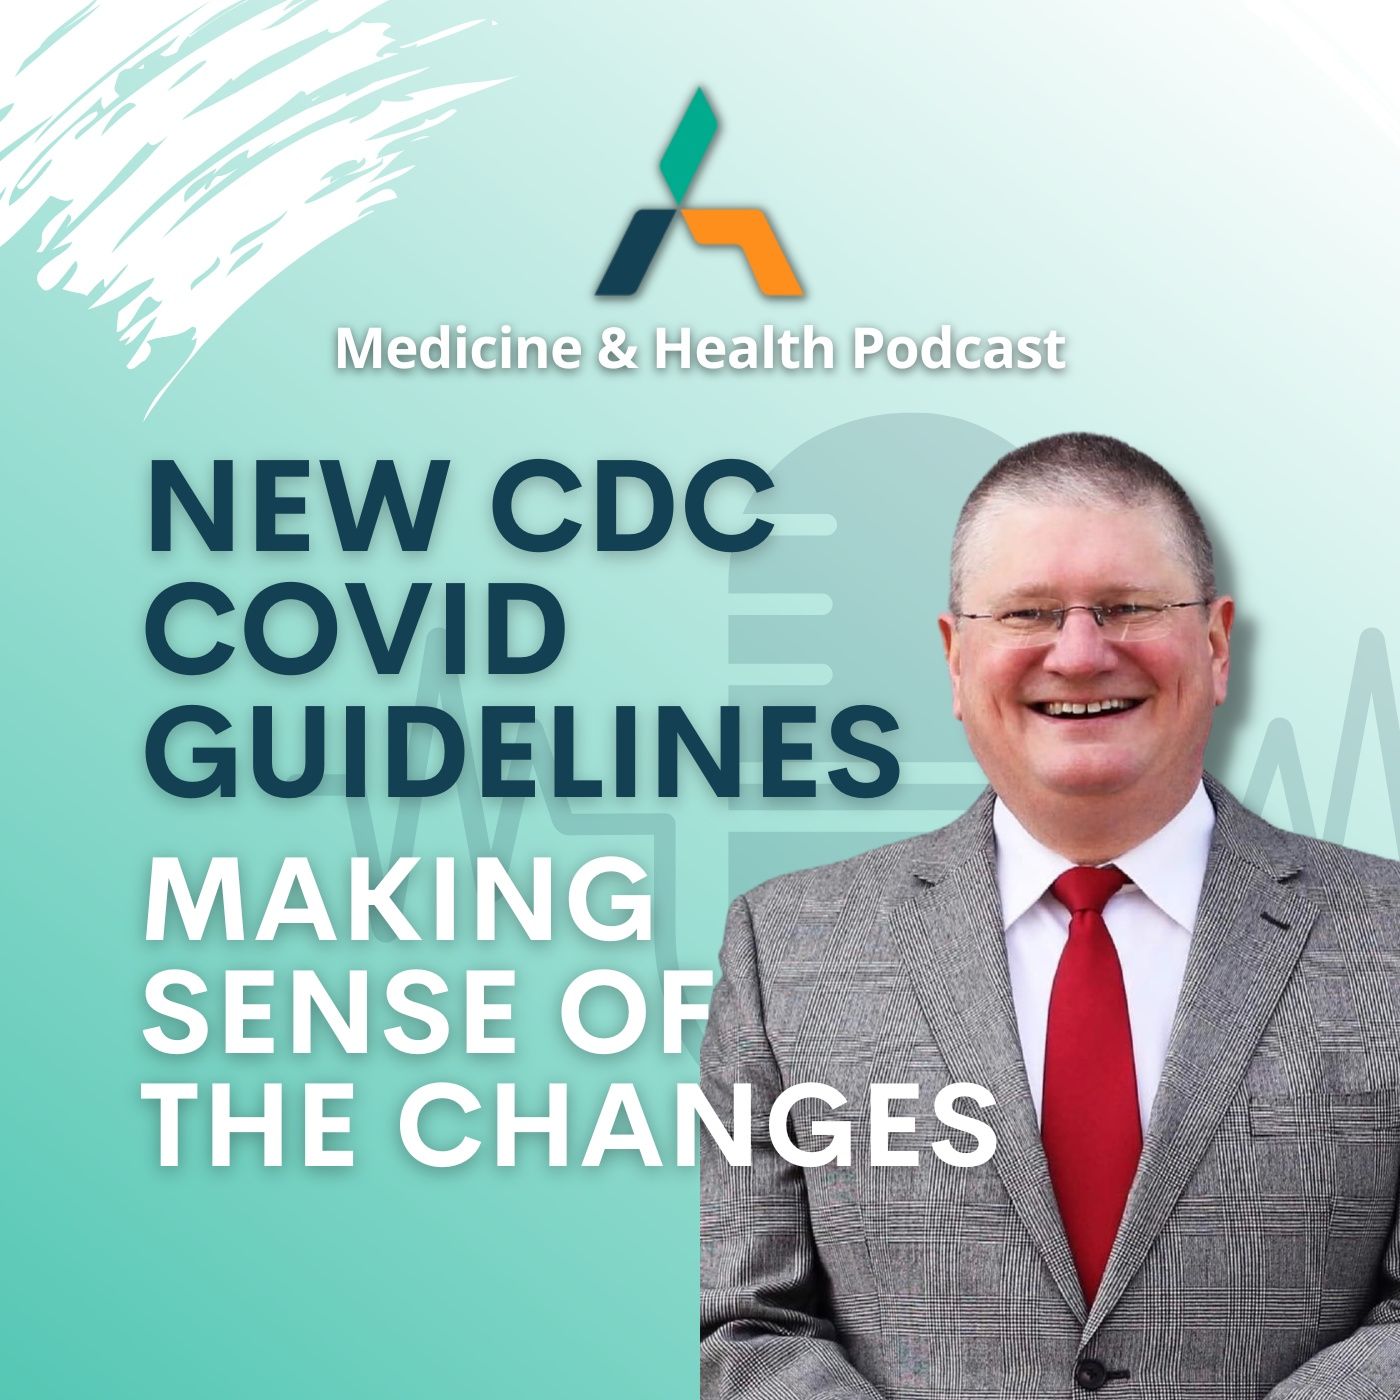 NEW CDC COVID GUIDELINES - MAKING SENSE OF THE CHANGES